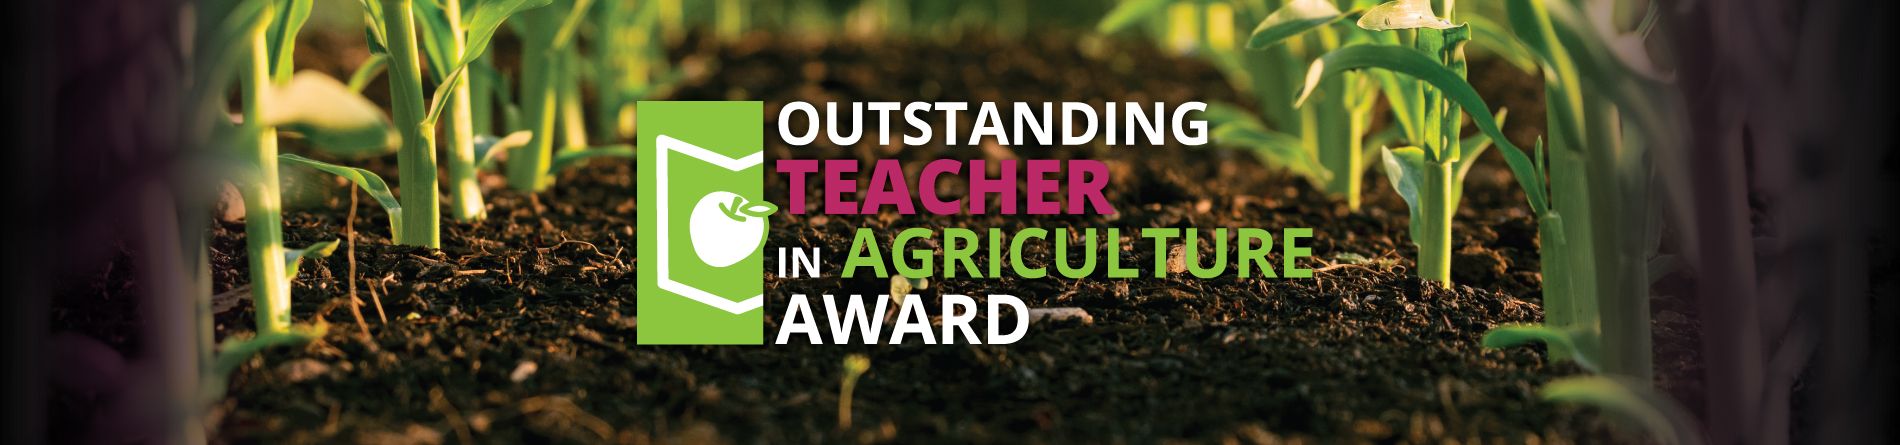 Outstanding Teacher in Agriculture Award